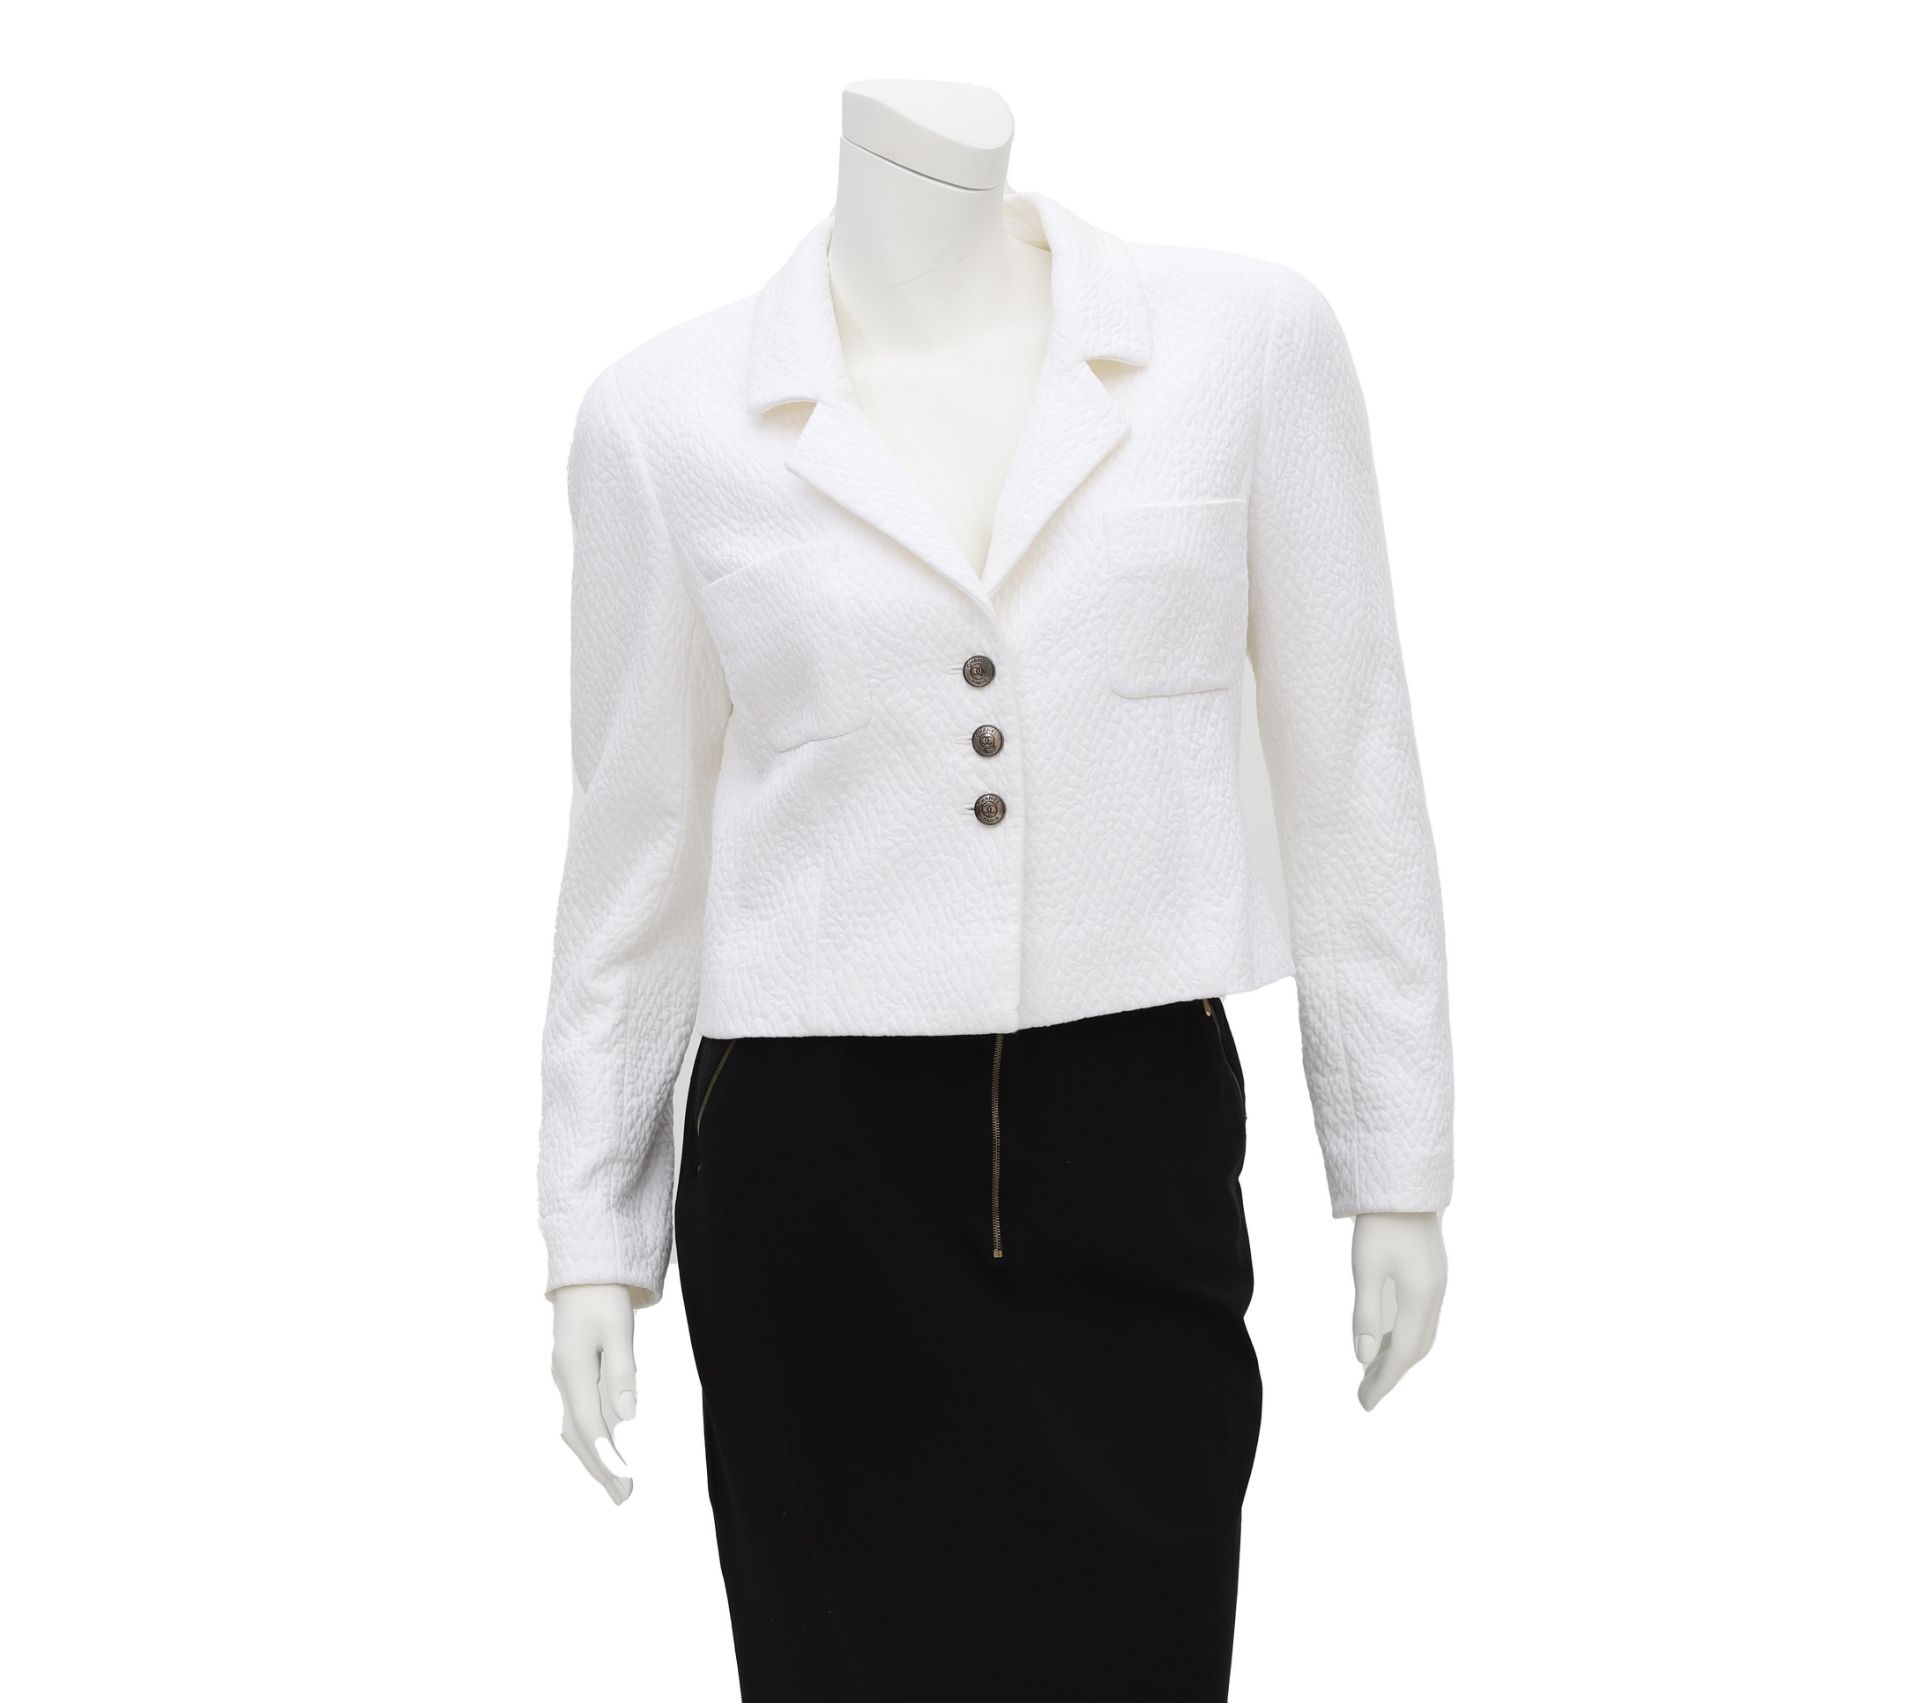 Chanel Boutique white jacket with a quilted pattern. The jacket has two external pockets, a